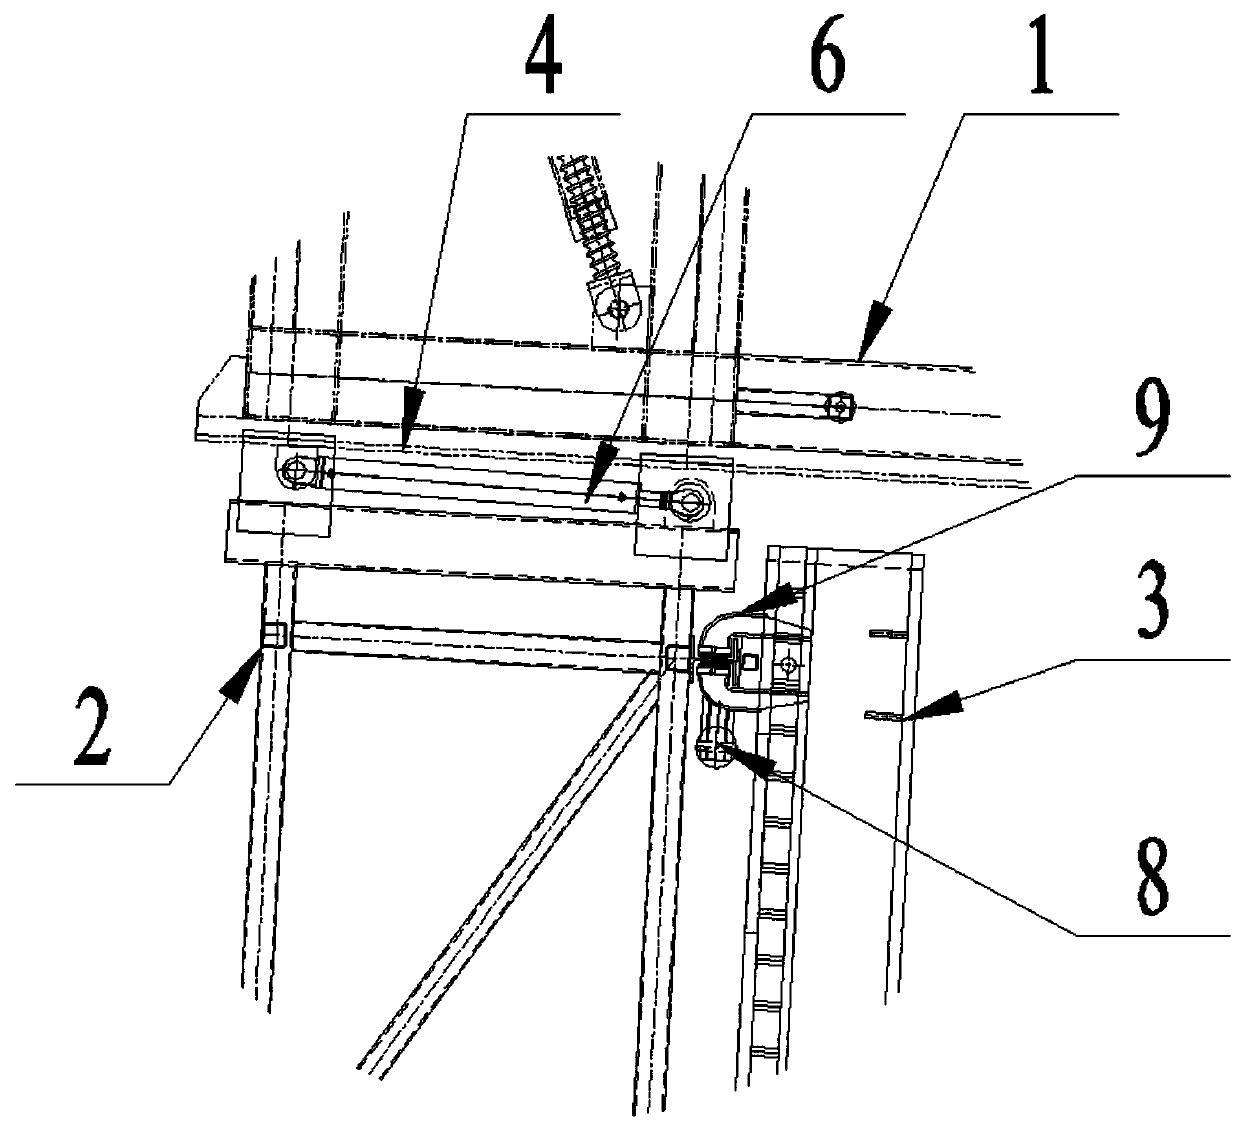 Movable track lifting device